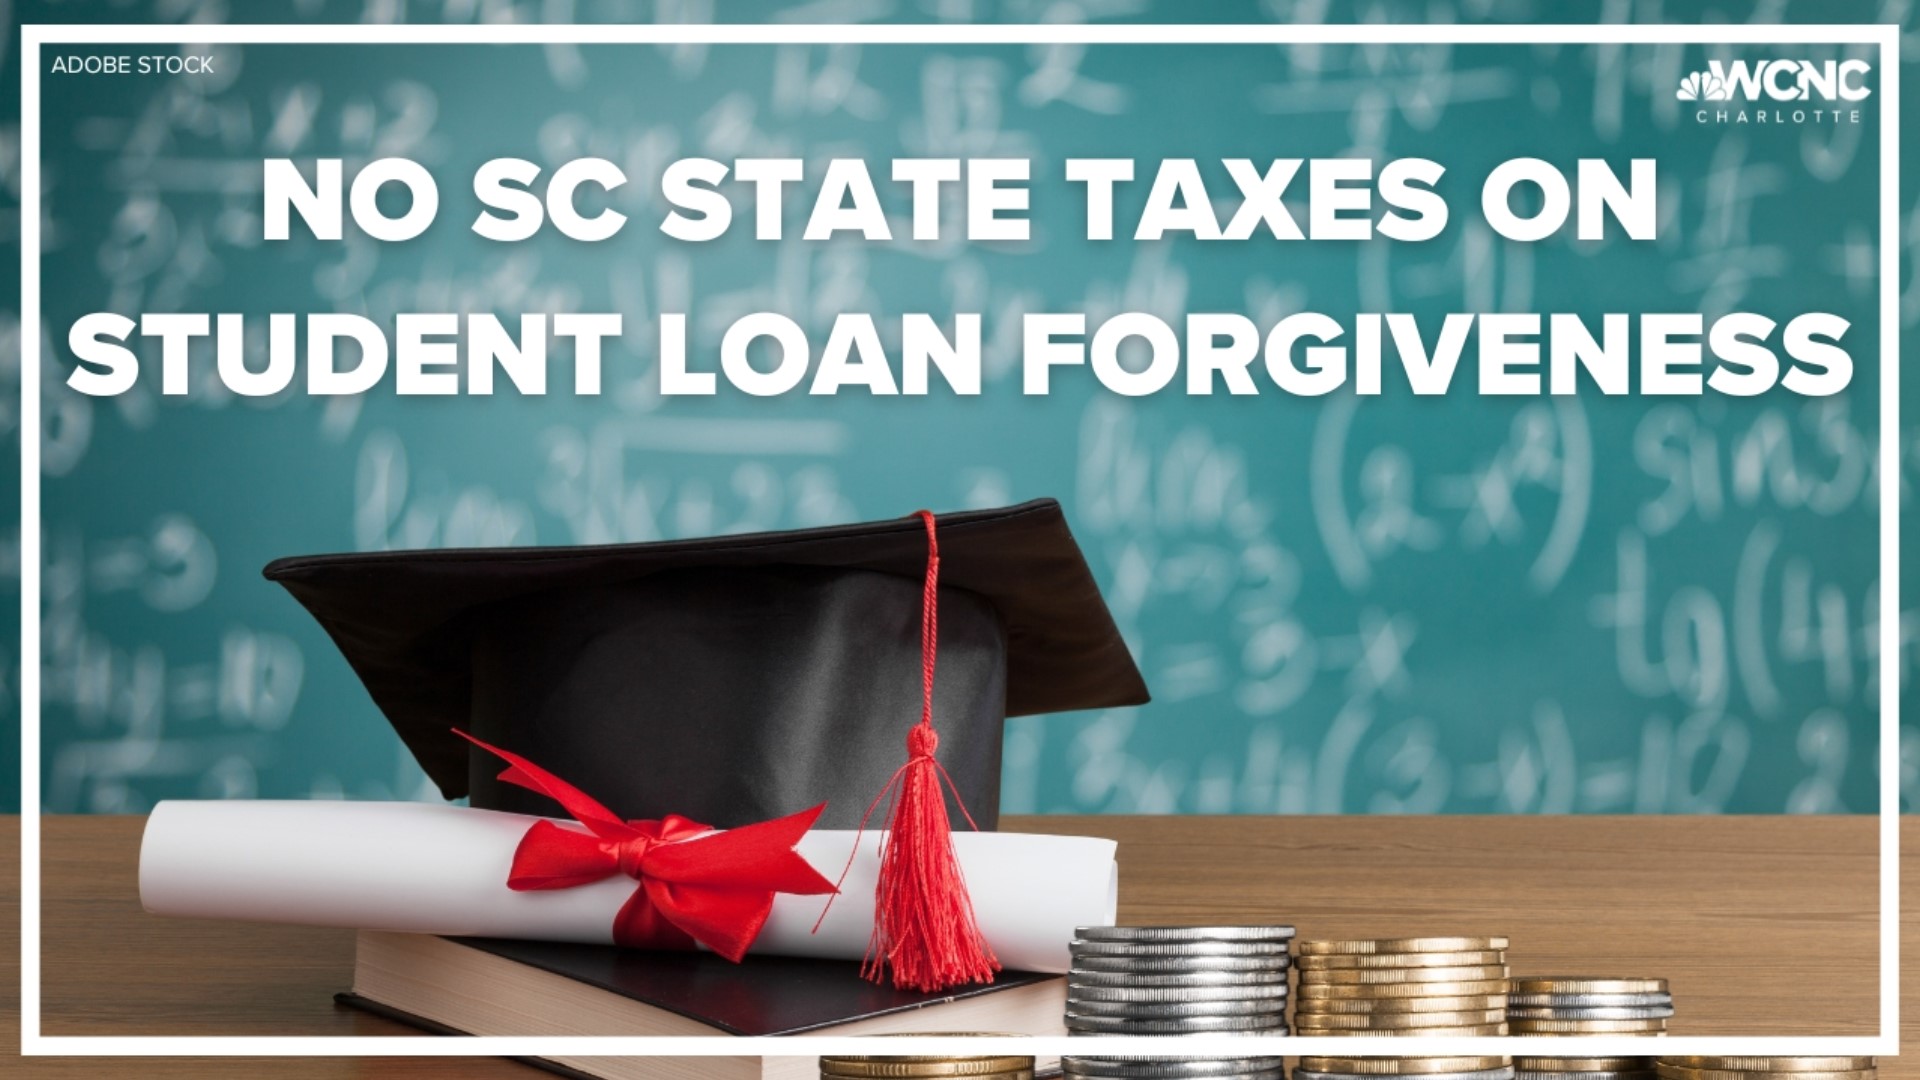 The South Carolina Department of Revenue says anyone taking part in President Biden's student loan forgiveness won't pay state taxes.